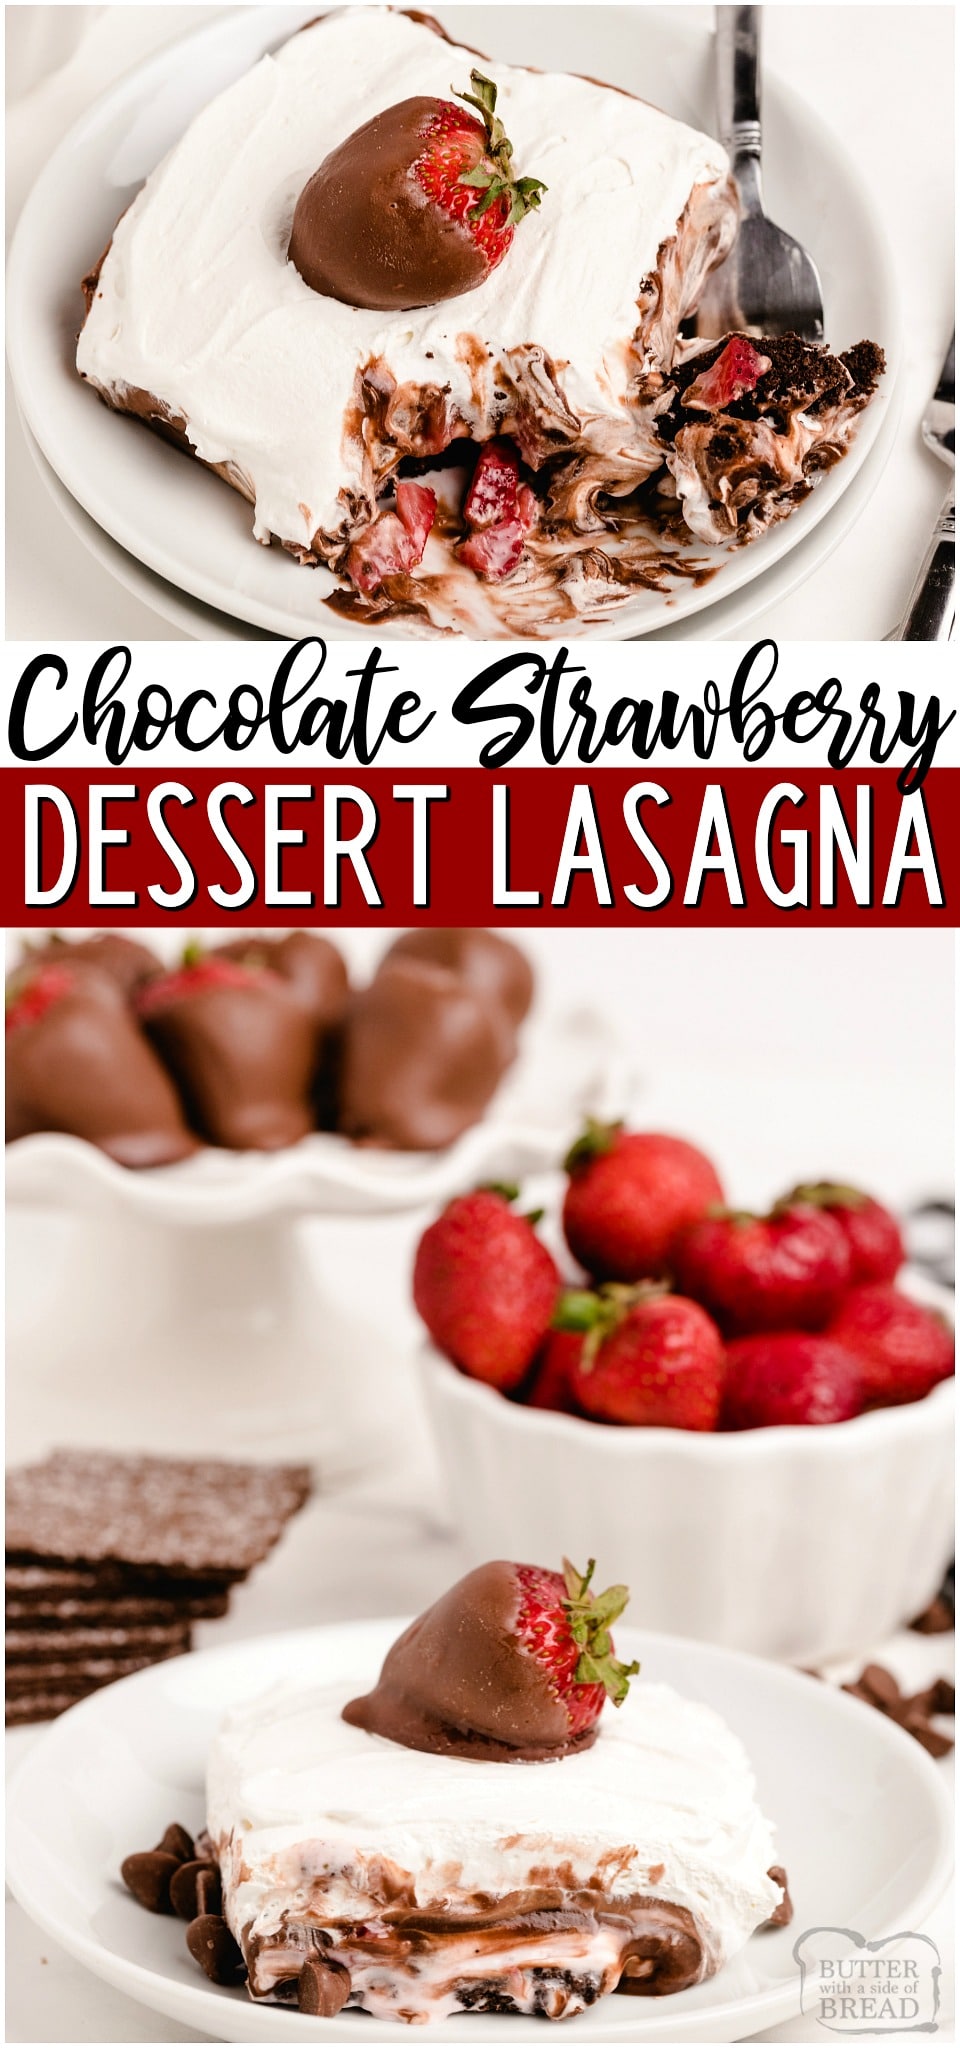 No bake Chocolate Lasagna with Strawberries is a layered pudding dessert filled with chocolate, sweet cream and fresh strawberries! Dessert Lasagna topped with chocolate covered strawberries is perfect for any occasion!